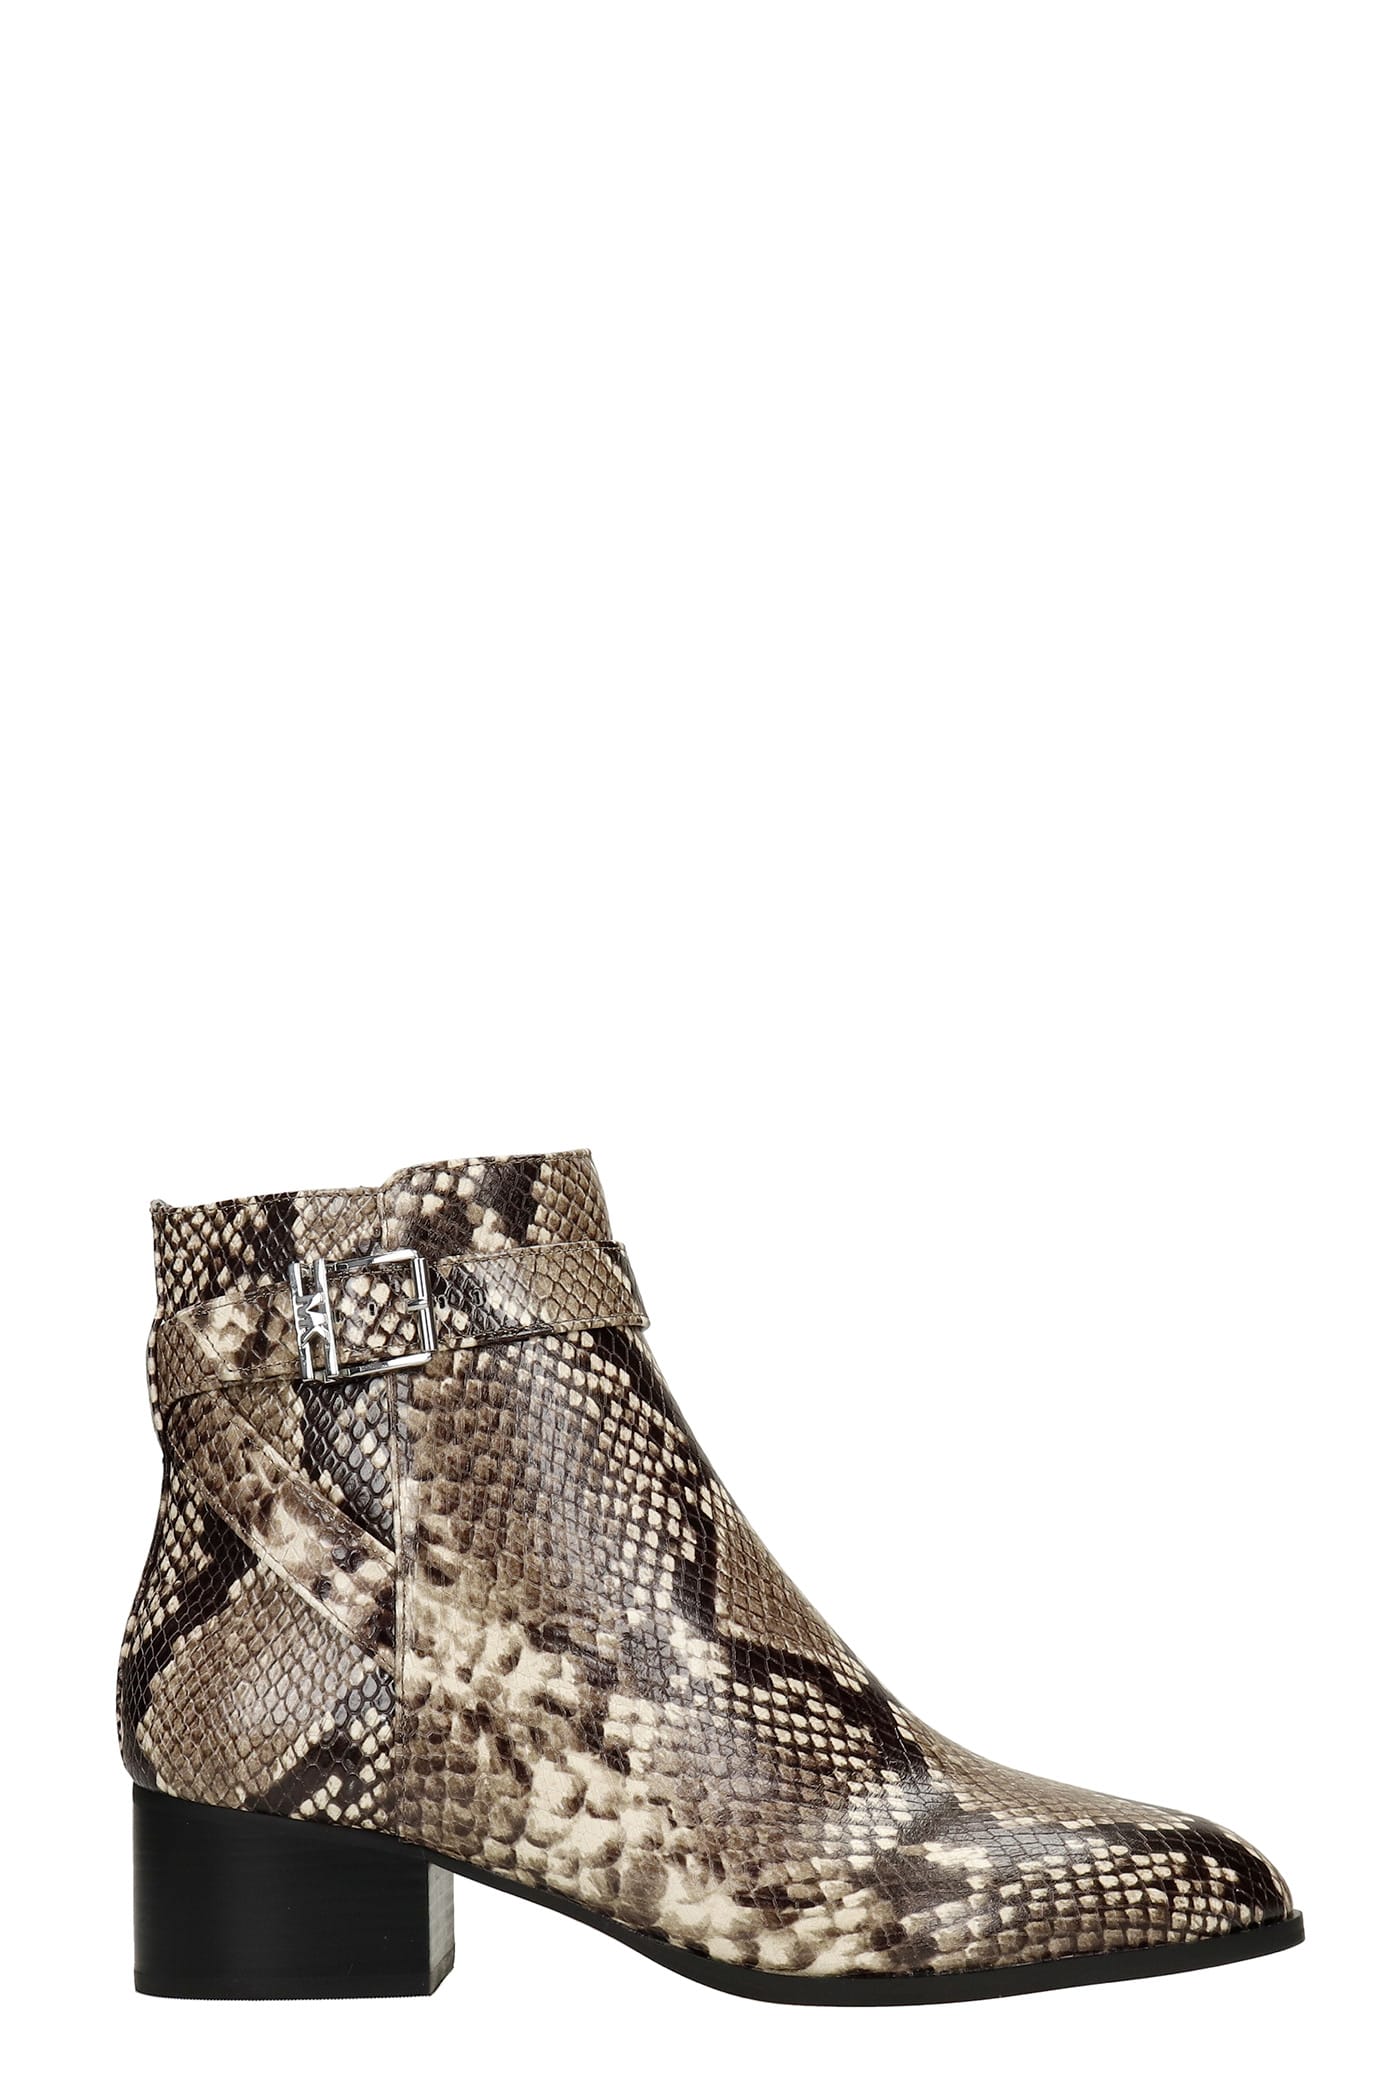 Michael Kors Britton Low Heels Ankle Boots In Python Print Leather